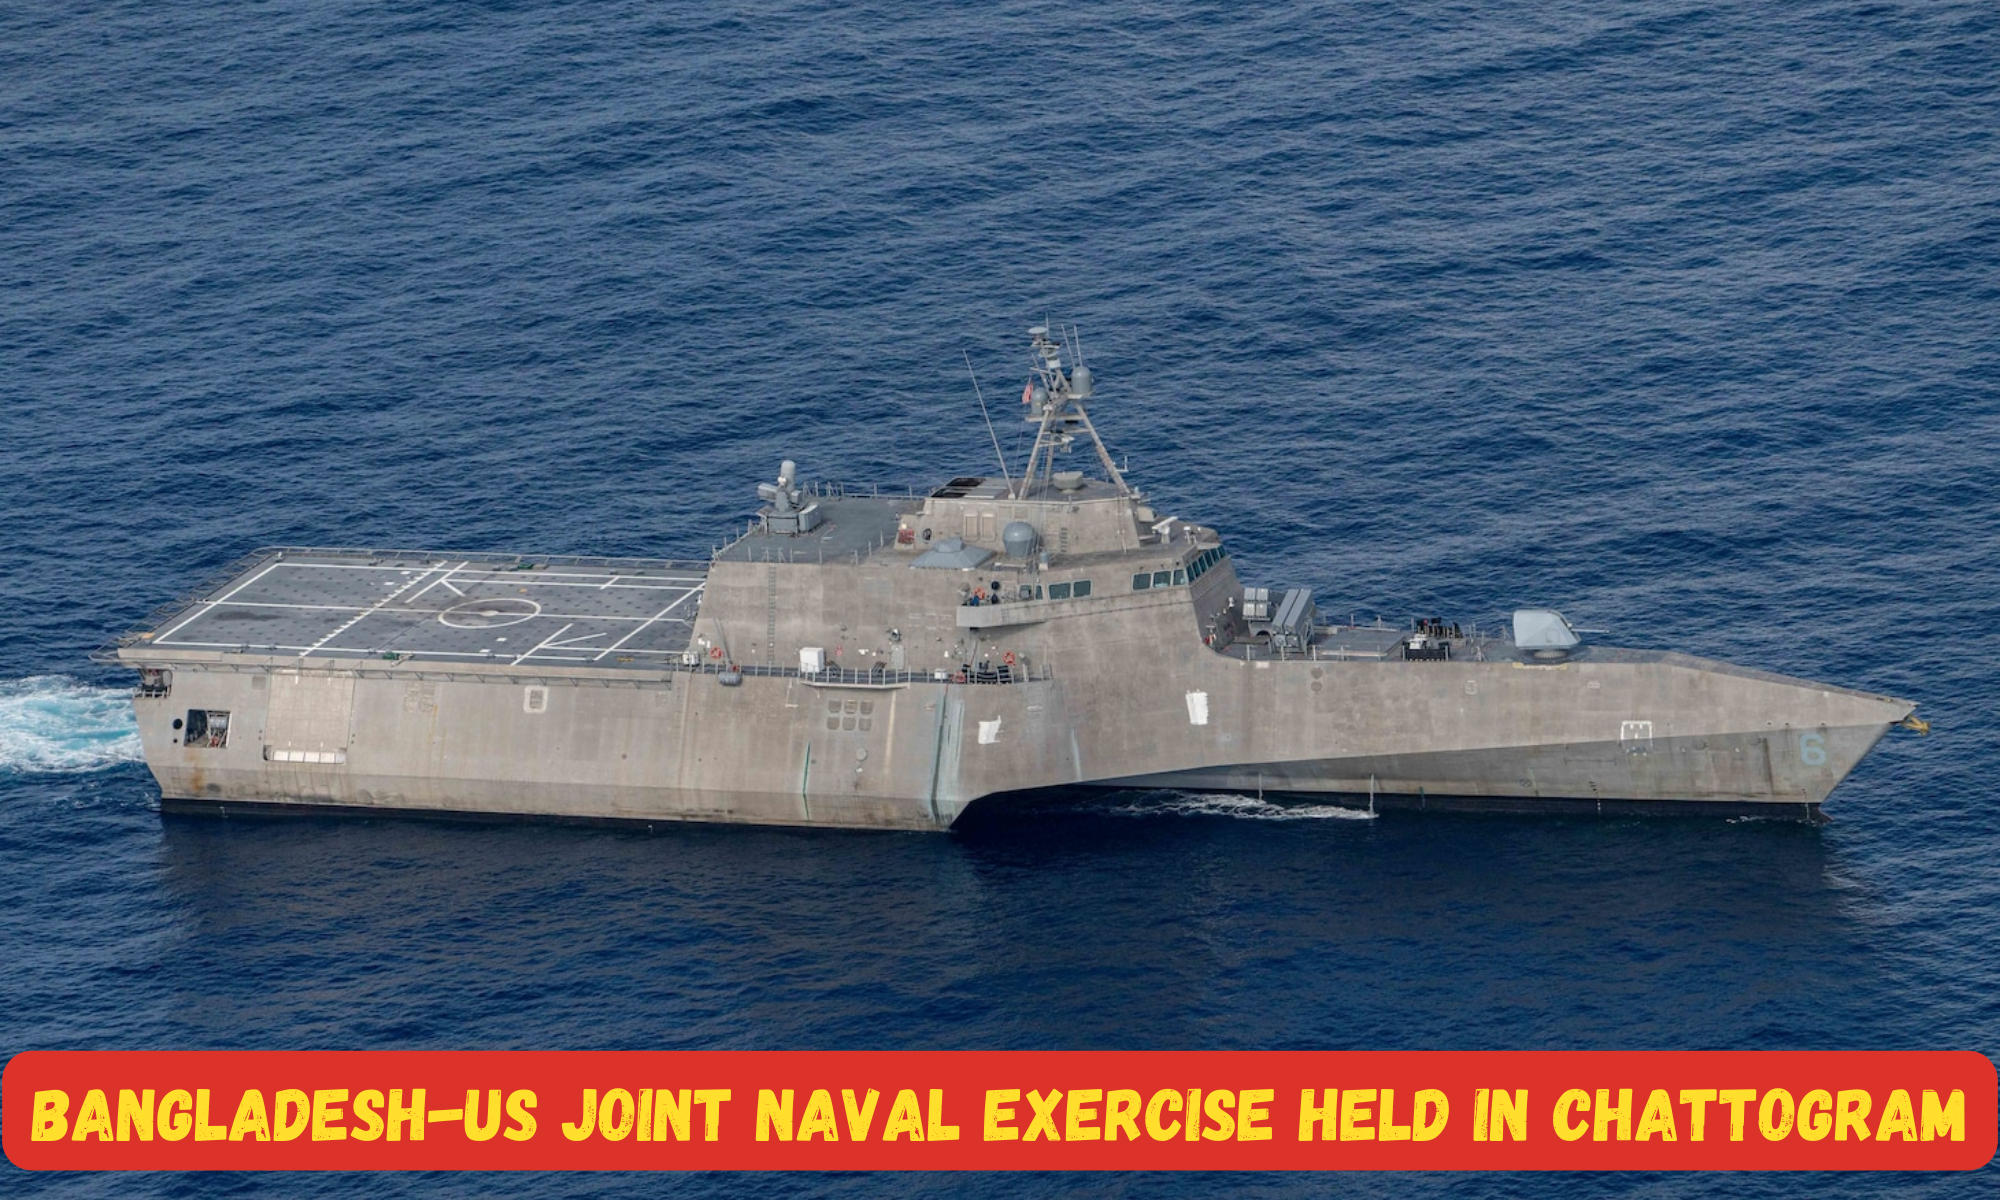 Bangladesh-US Joint Naval Exercise held in Chattogram